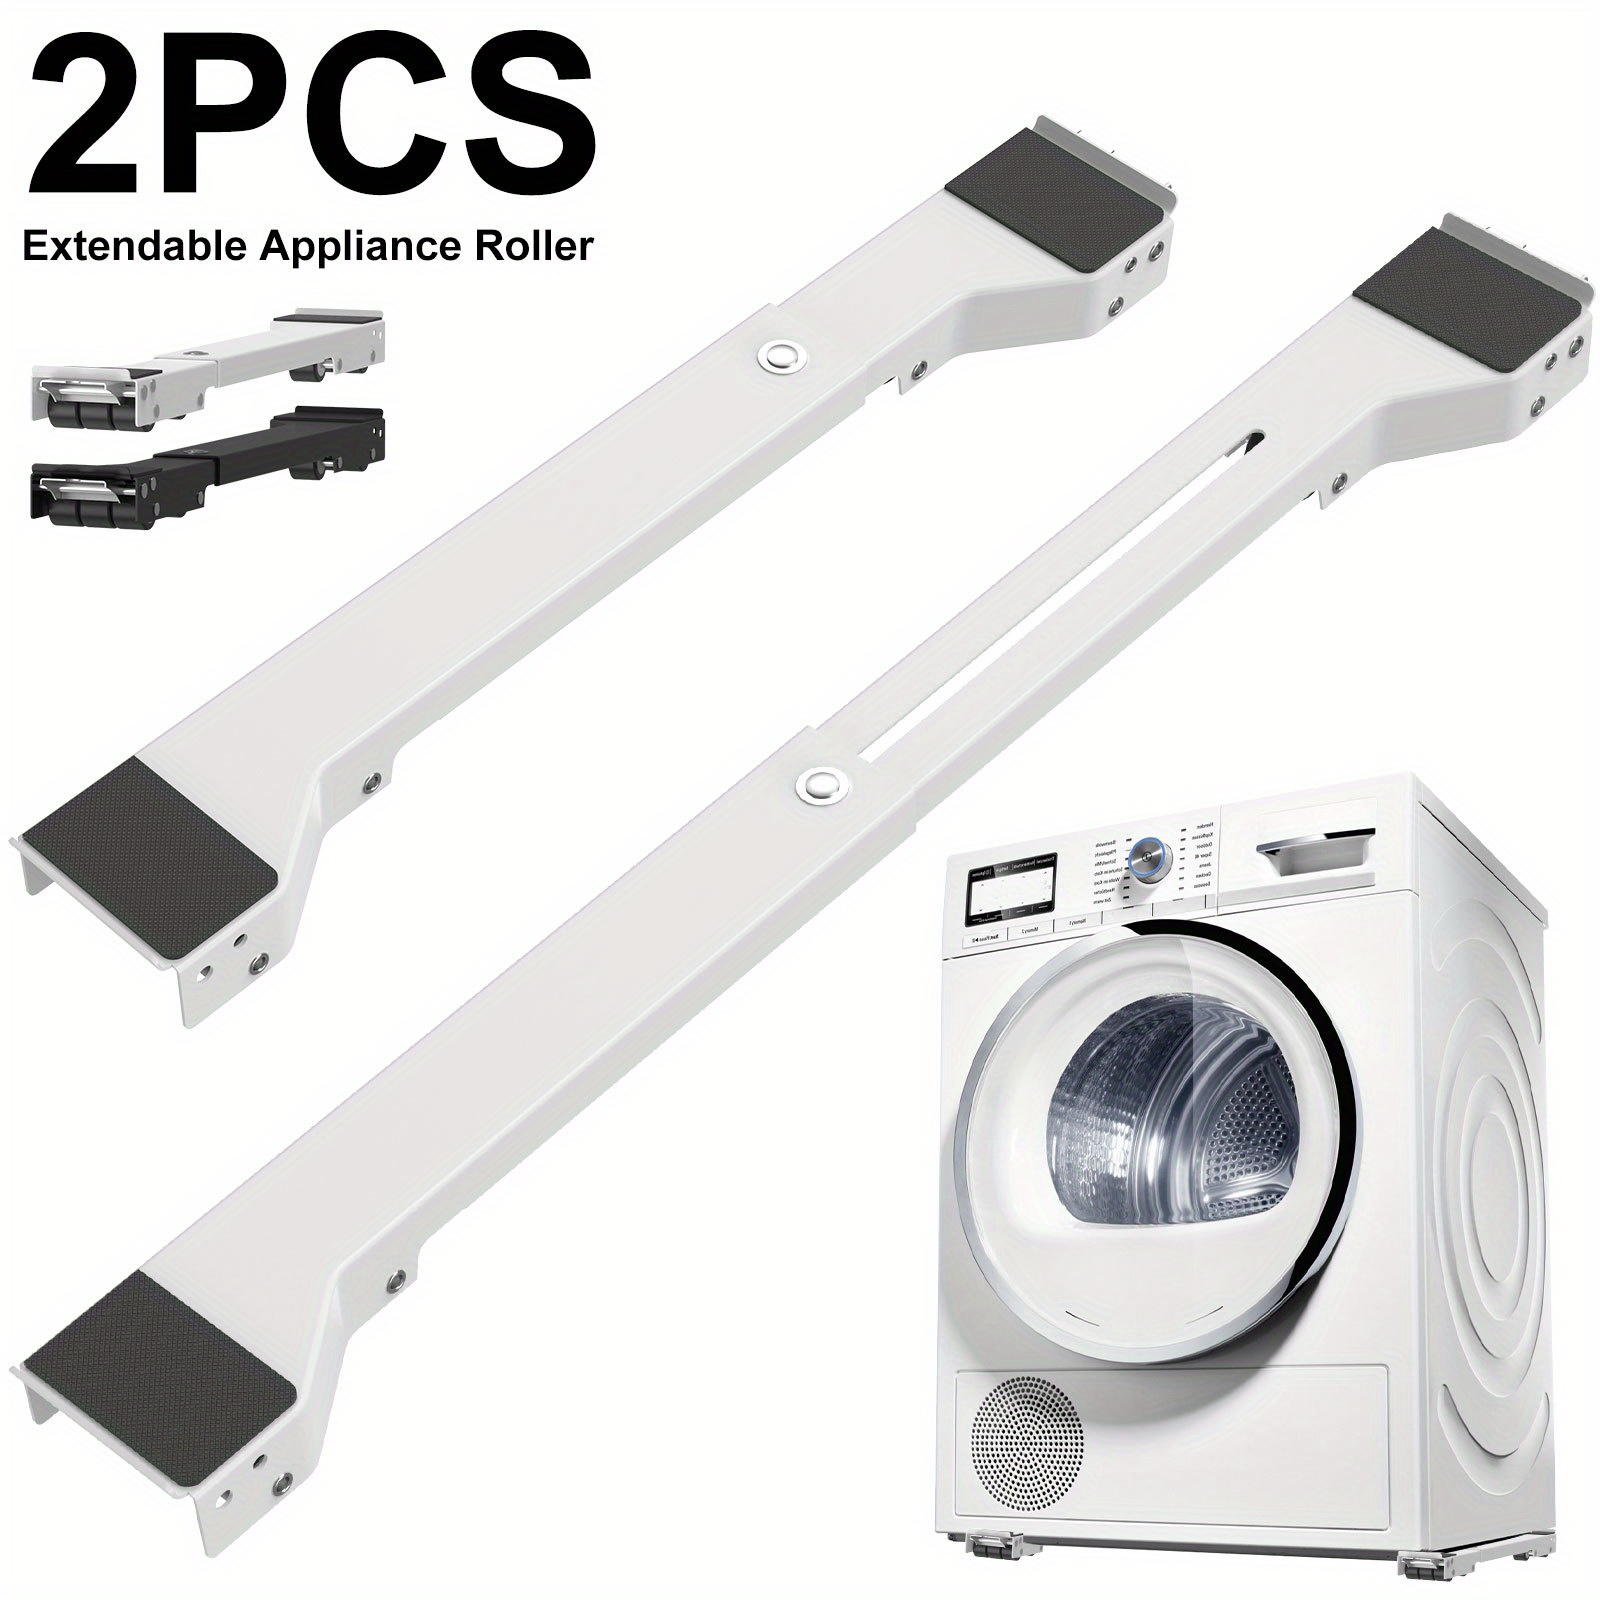 2pcs Washing Machine Sliders, Extendable Appliance Roller, Heavy Duty Appliance  Mover, 661.39lb Load Capacity Anti-slip Appliance Sliders For  Refrigerators, Washing Machine Stand Wheels, Mobile Washing Machine Base -  Tools & Home Improvement 